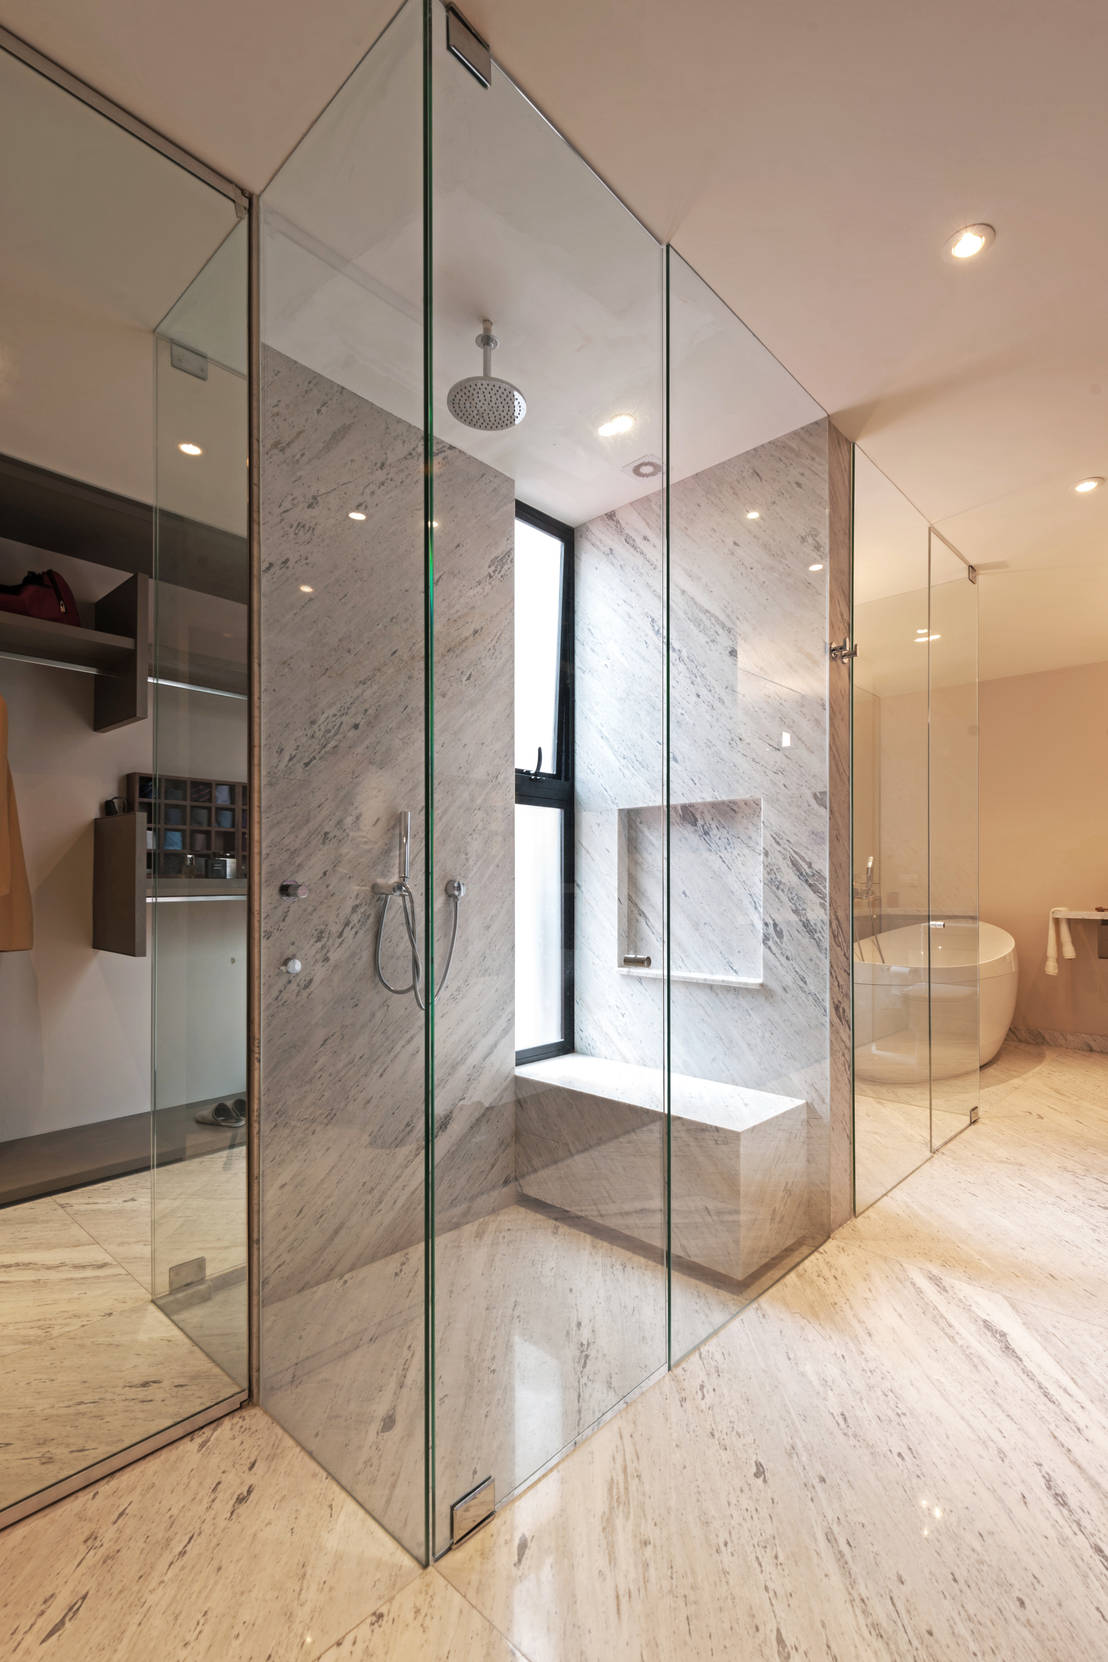 16 bathrooms with modern and fabulous showers!